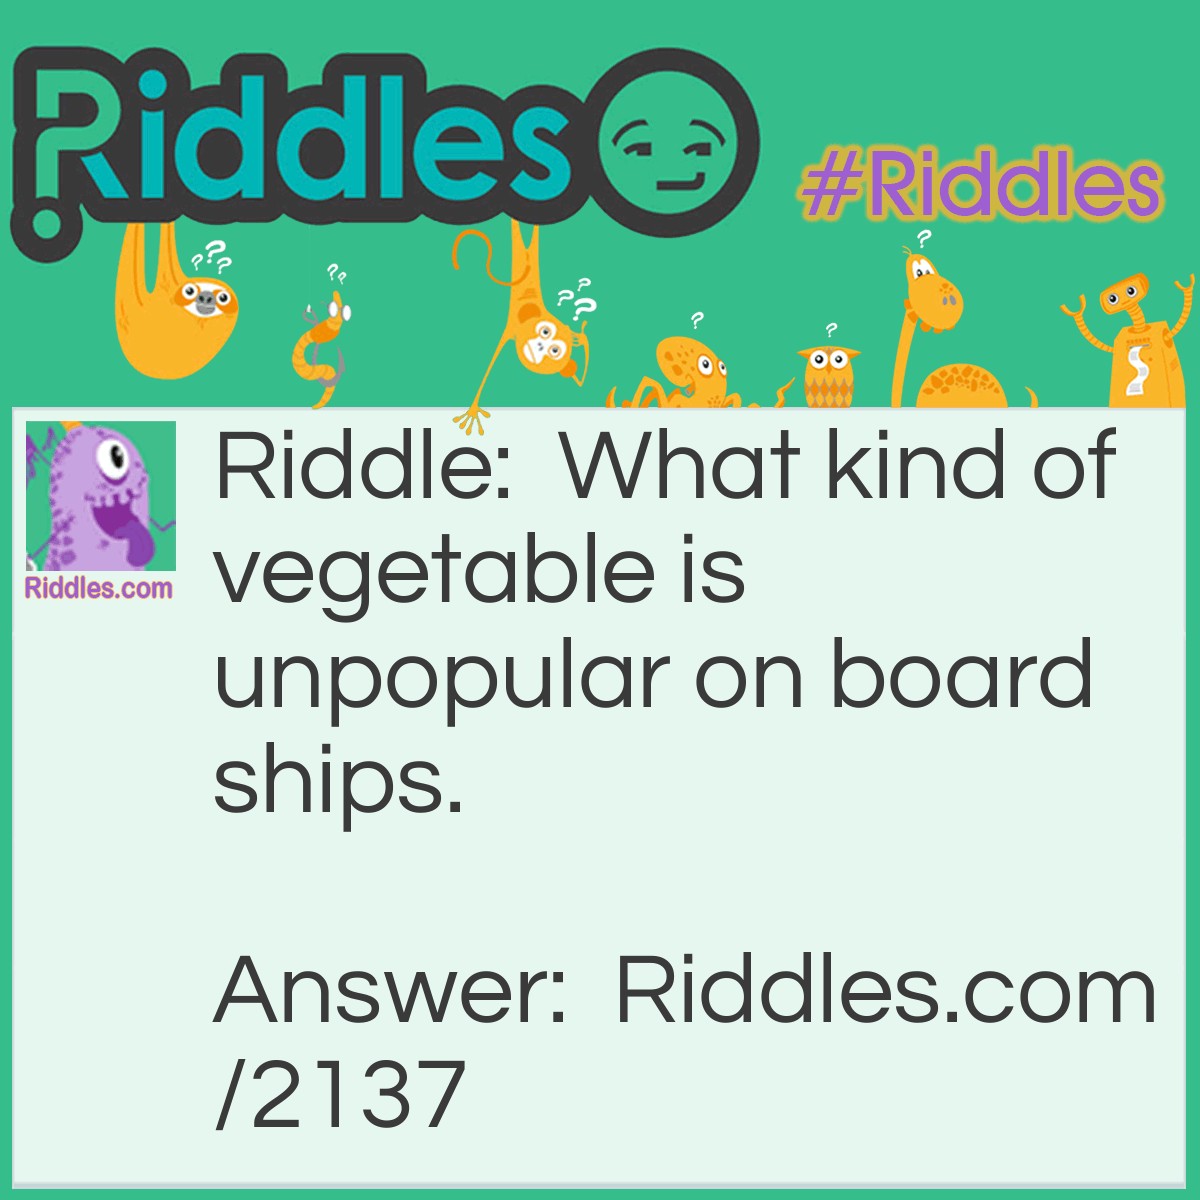 Riddle: What kind of vegetable is unpopular on board ships? Answer: A leek.